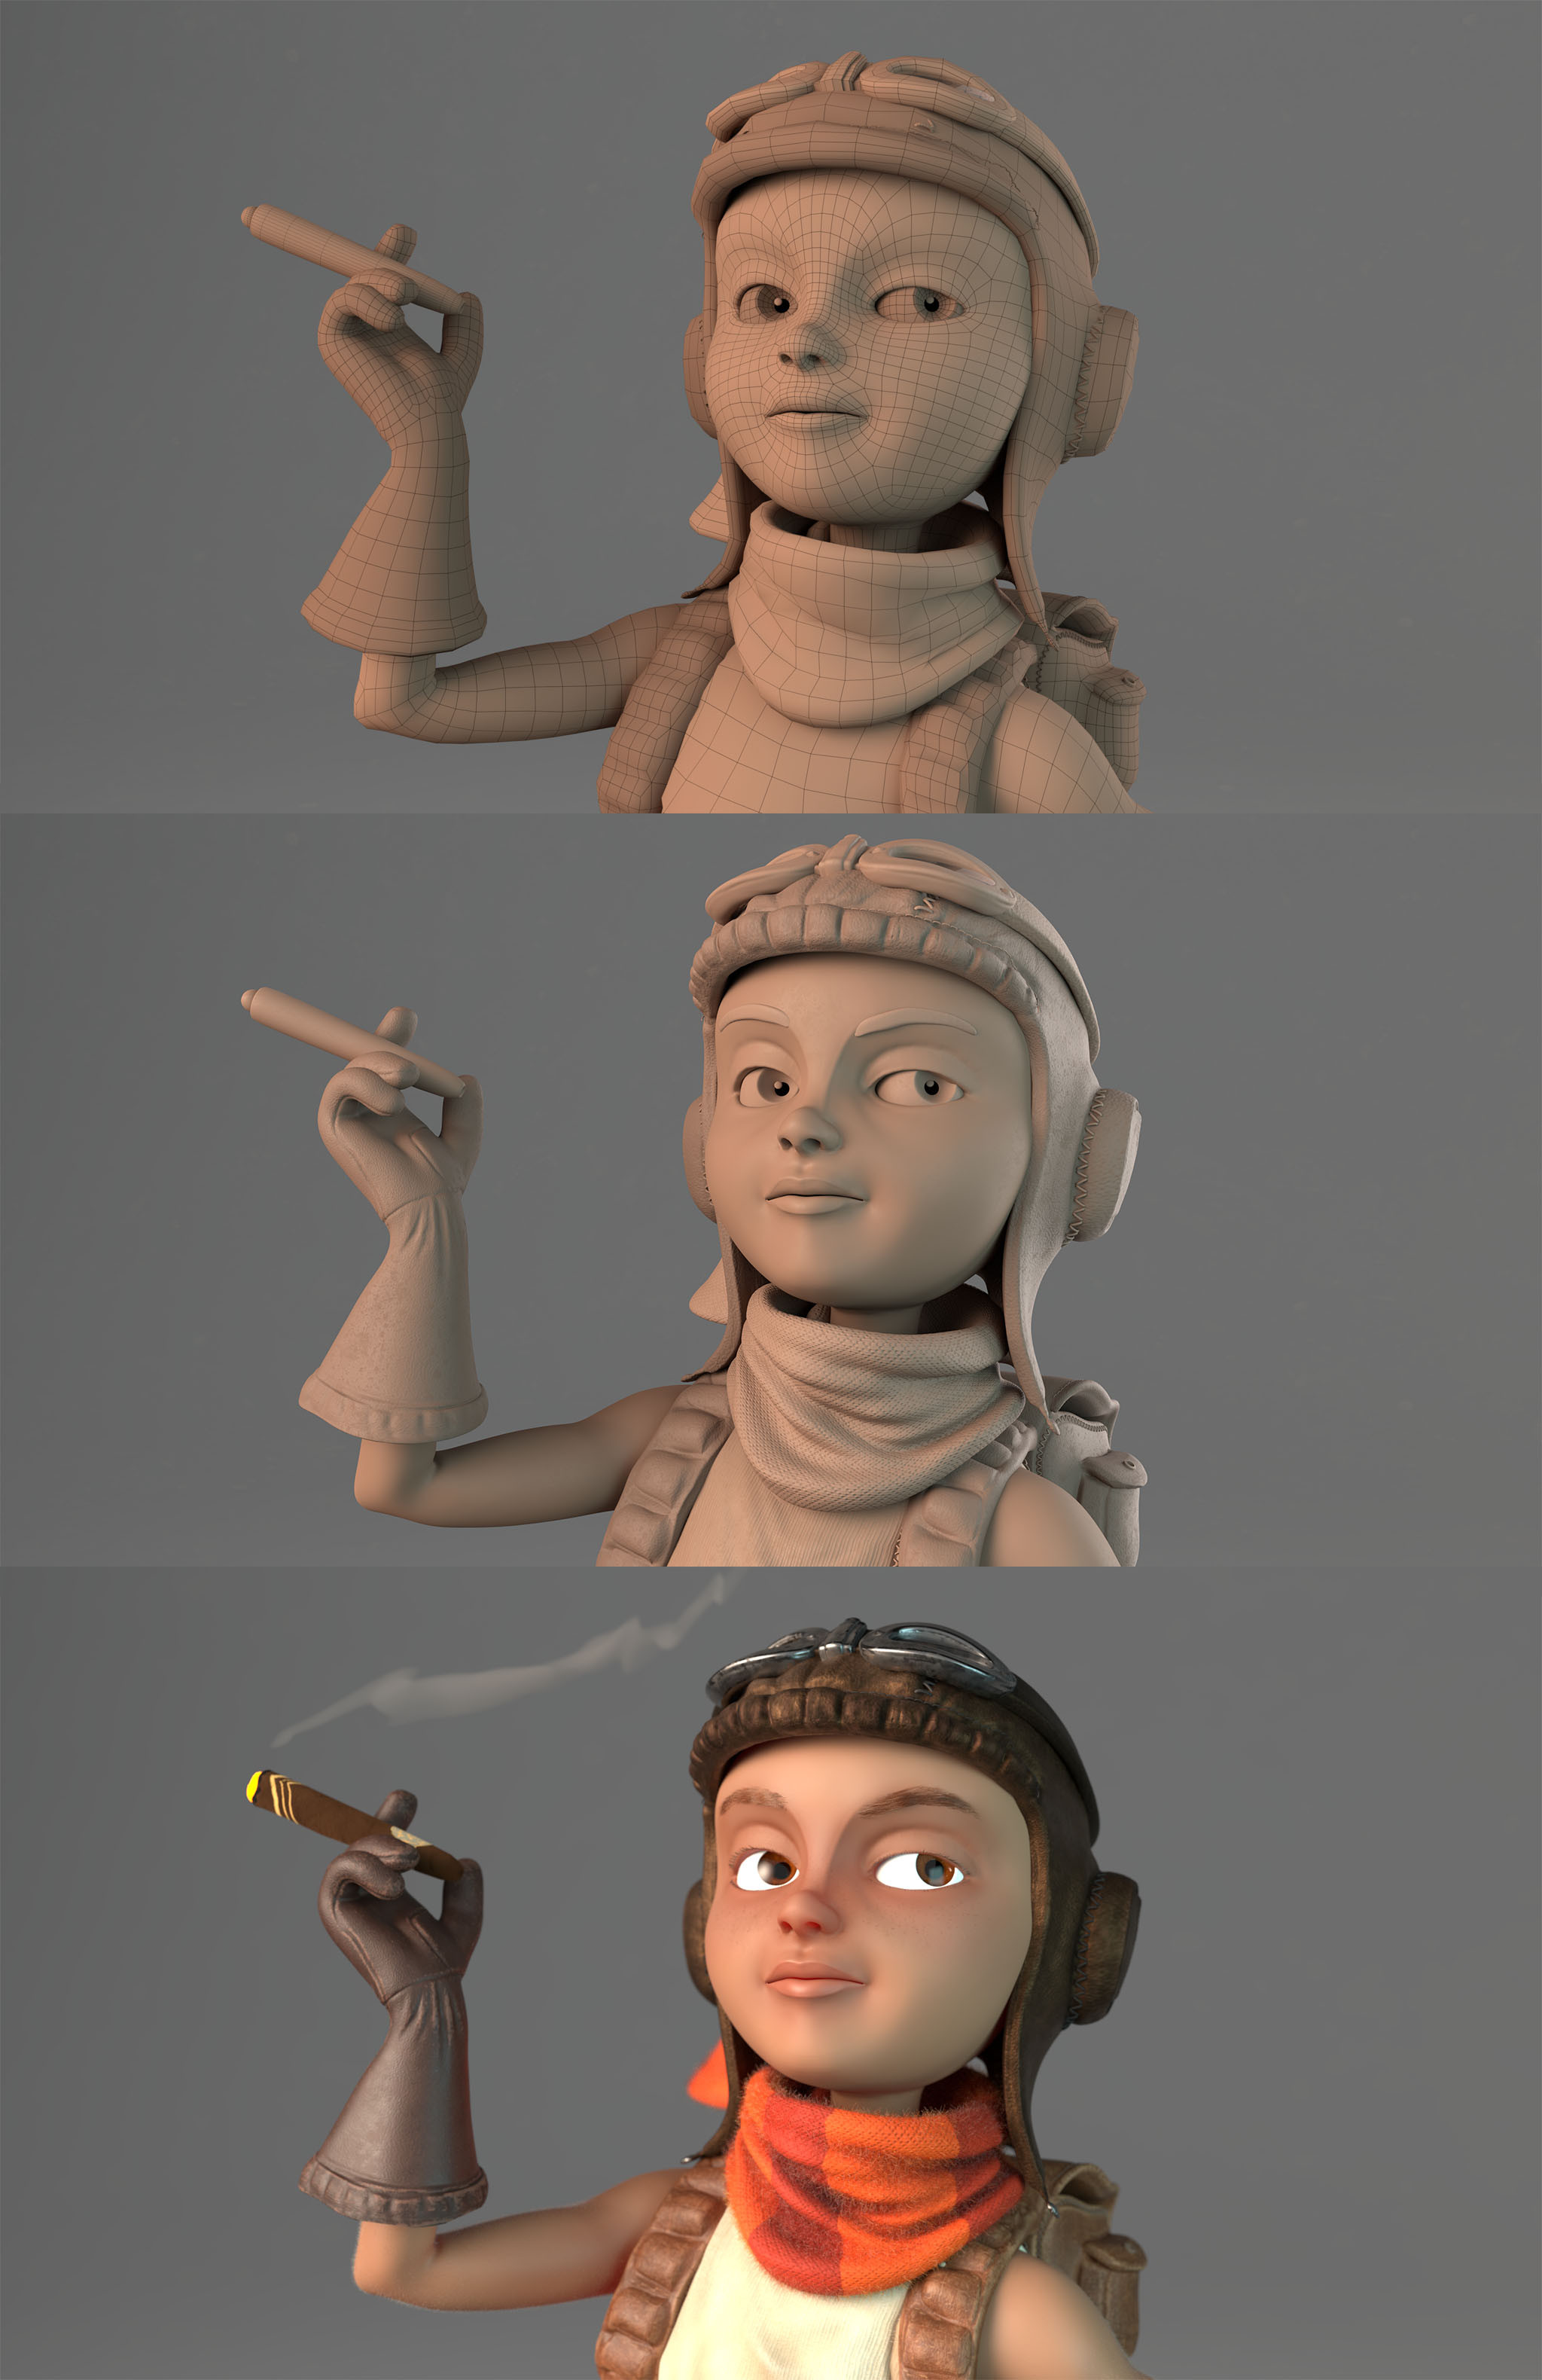 Comparison of the final renders for the face of a wireframe, clay shader, and final textured pass.